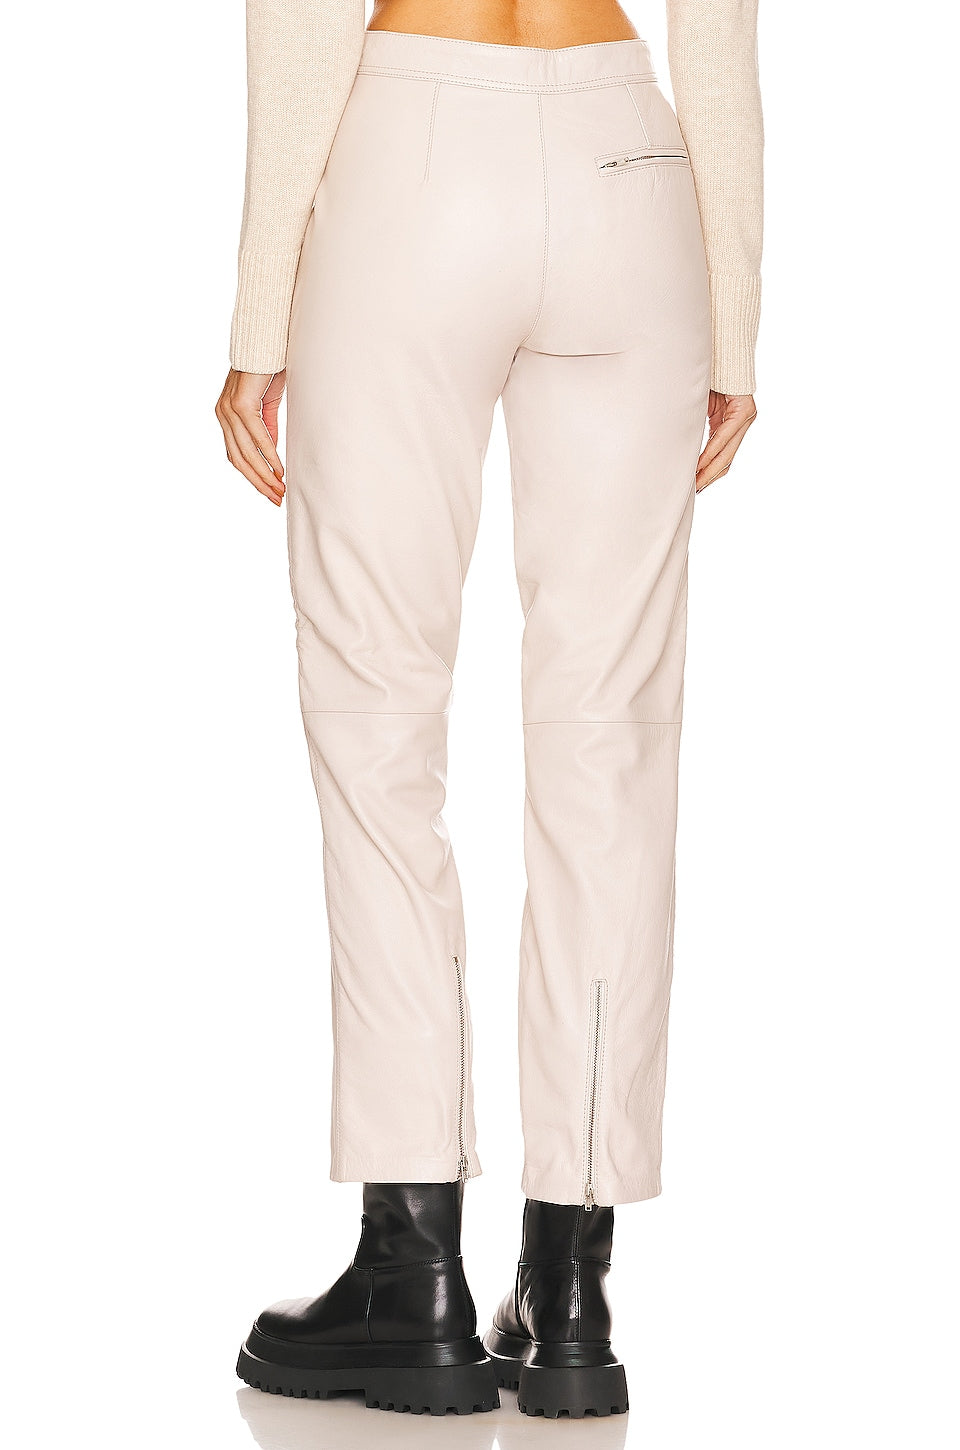 L'Academie Rue Leather Pant in Bone Ivory